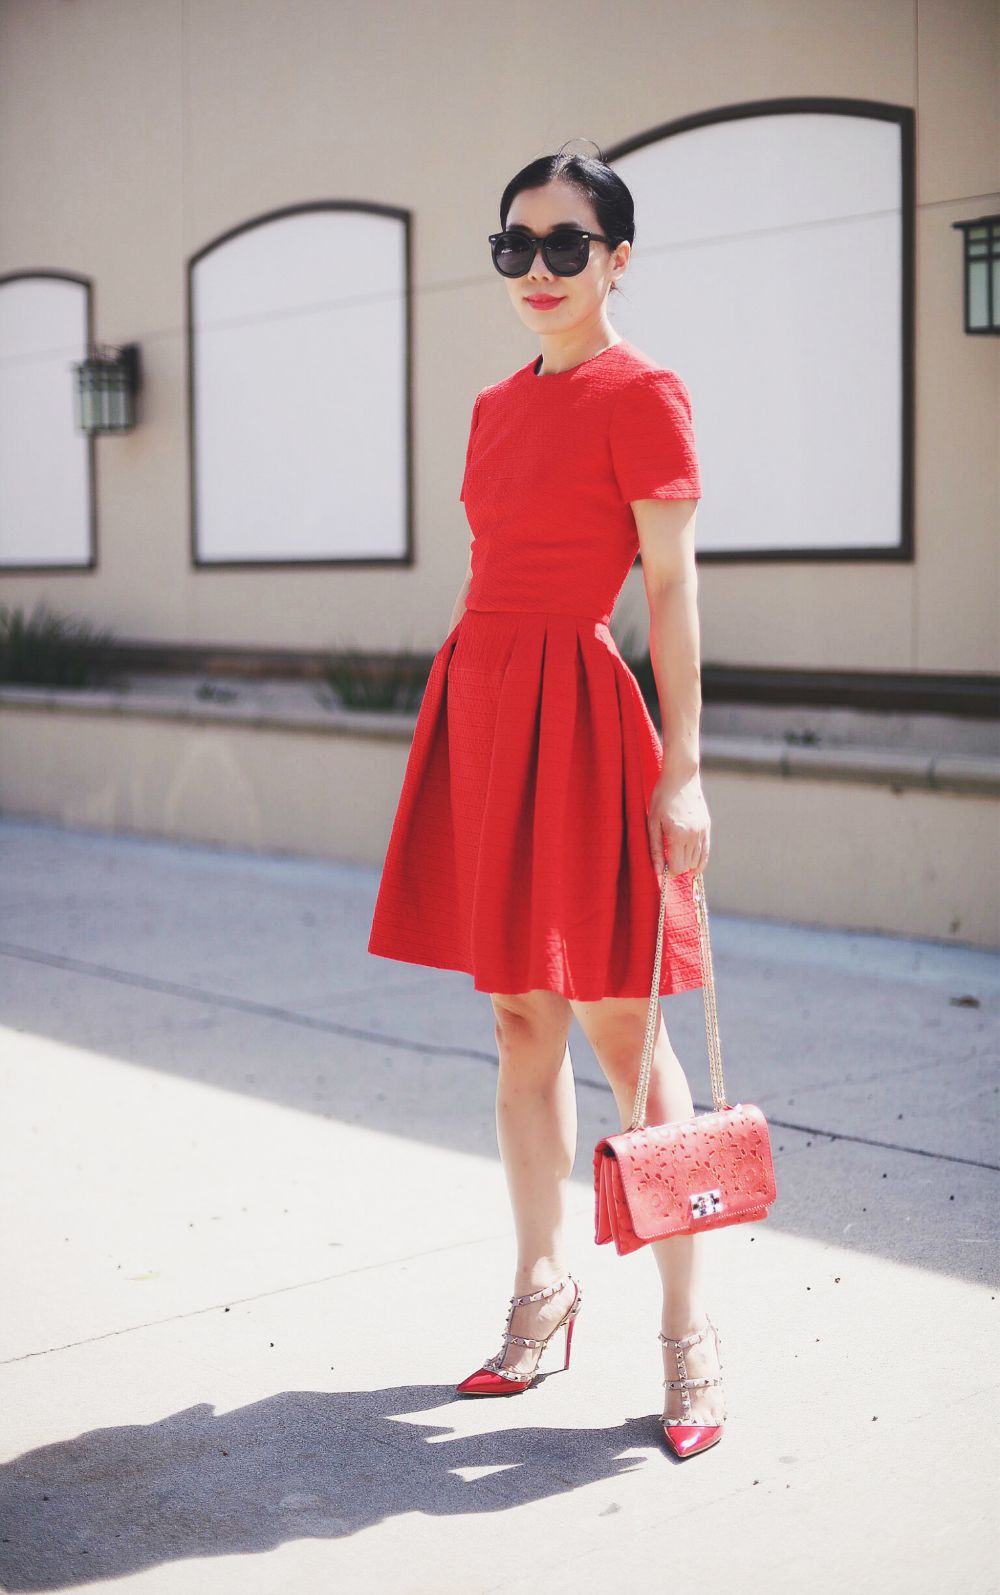 Red: Alexander McQueen Dress and Valentino Rockstud Shoes